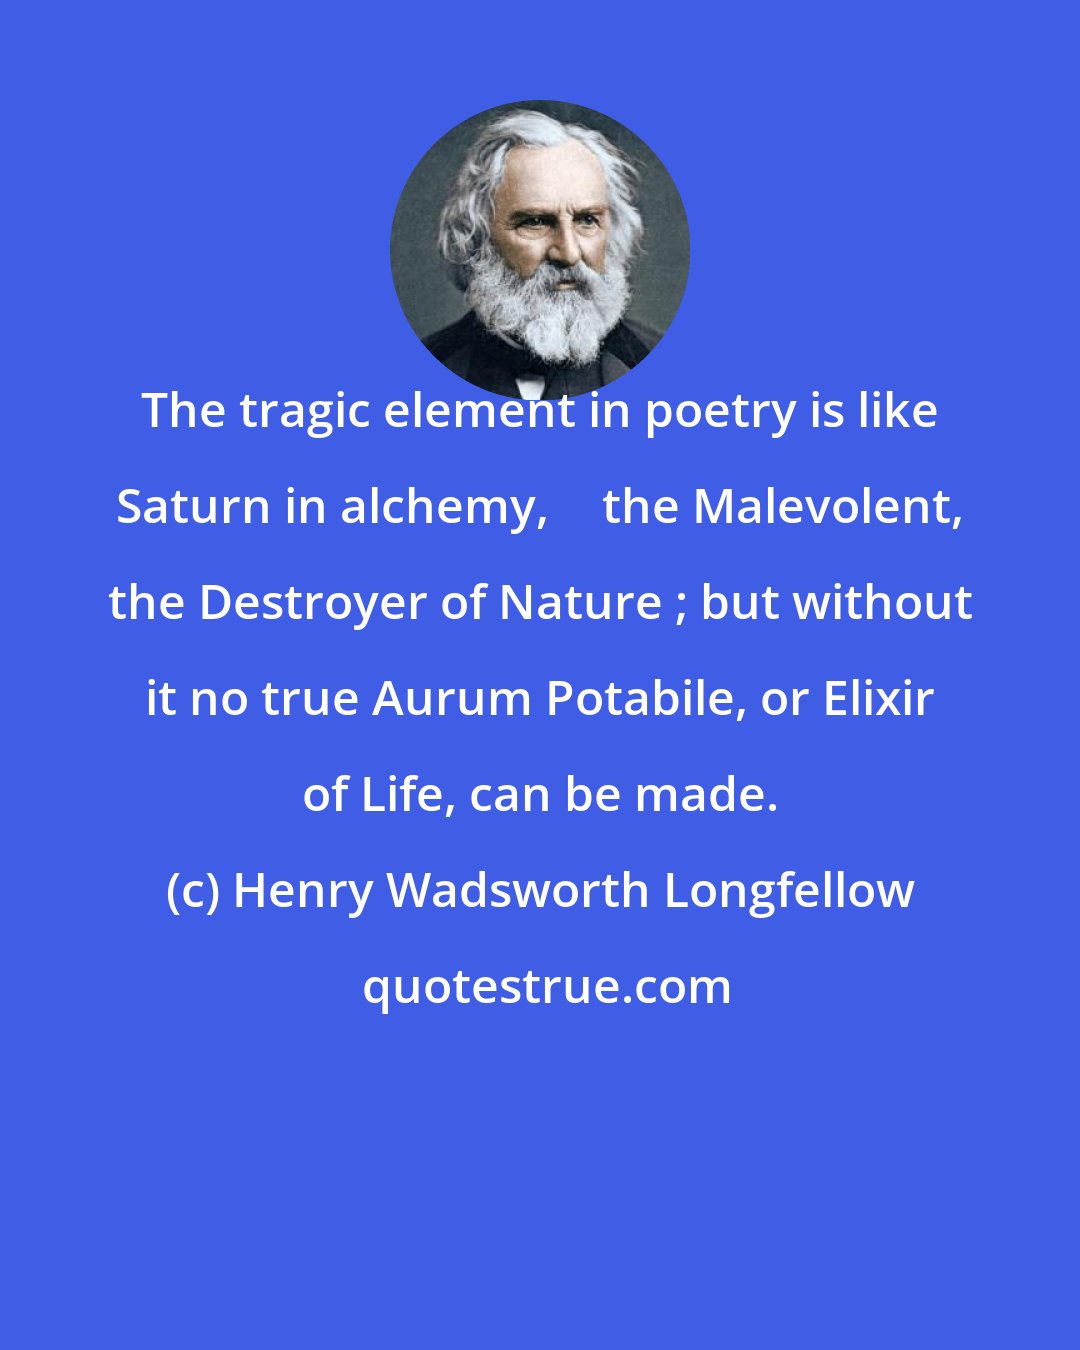 Henry Wadsworth Longfellow: The tragic element in poetry is like Saturn in alchemy,  the Malevolent, the Destroyer of Nature ; but without it no true Aurum Potabile, or Elixir of Life, can be made.